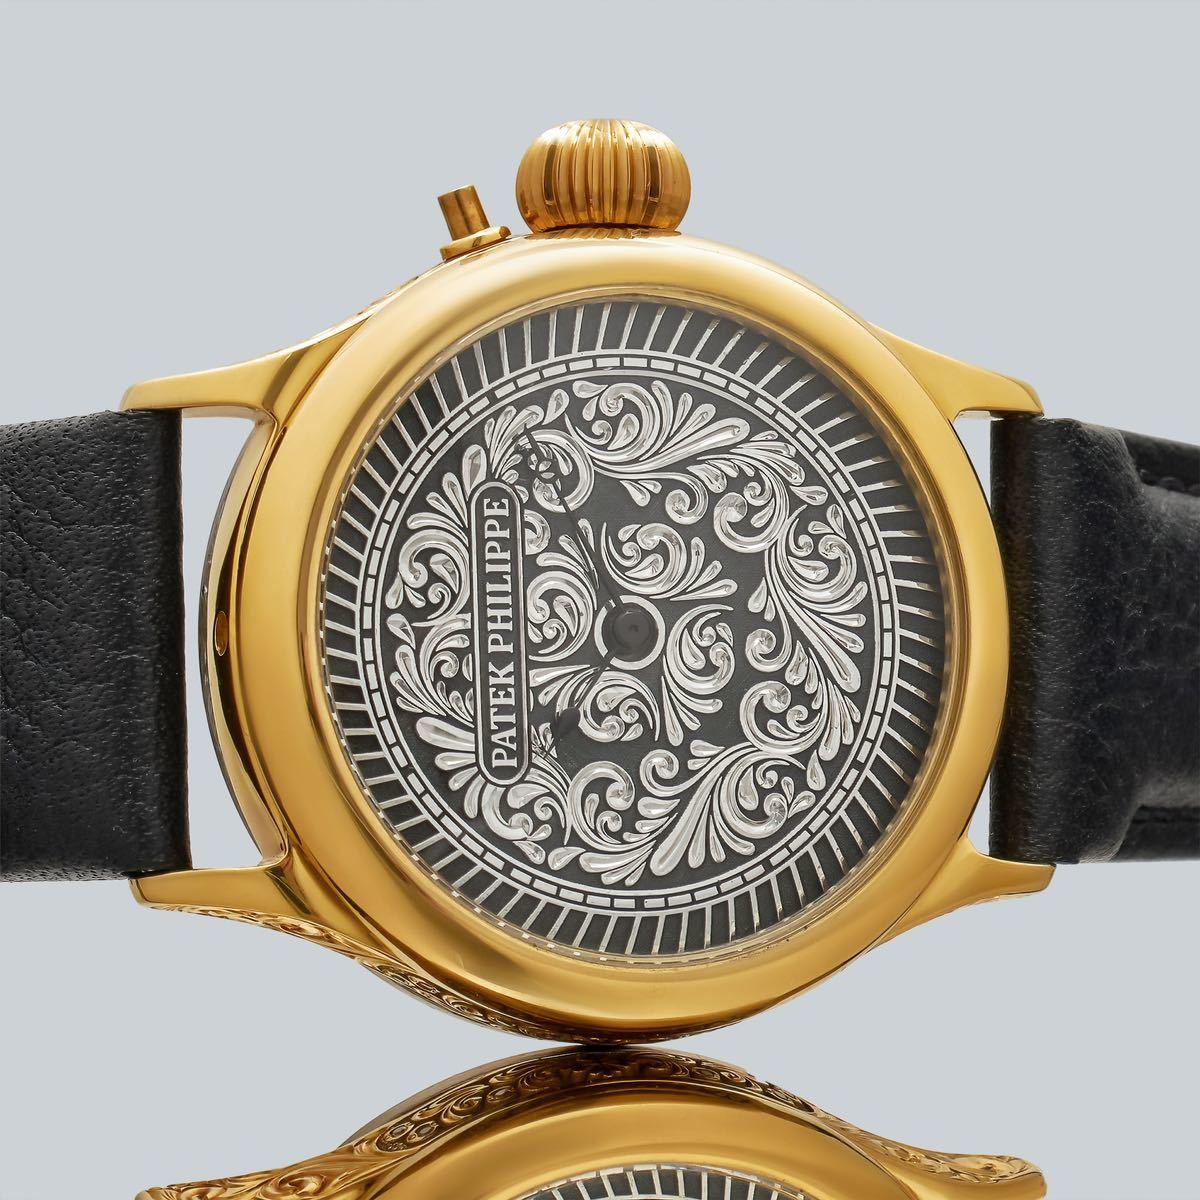 Marriage watch Patek Philippe 40mm men's watch with a pocket watch Manual winding skeleton - Murphy Johnson Watches Co.